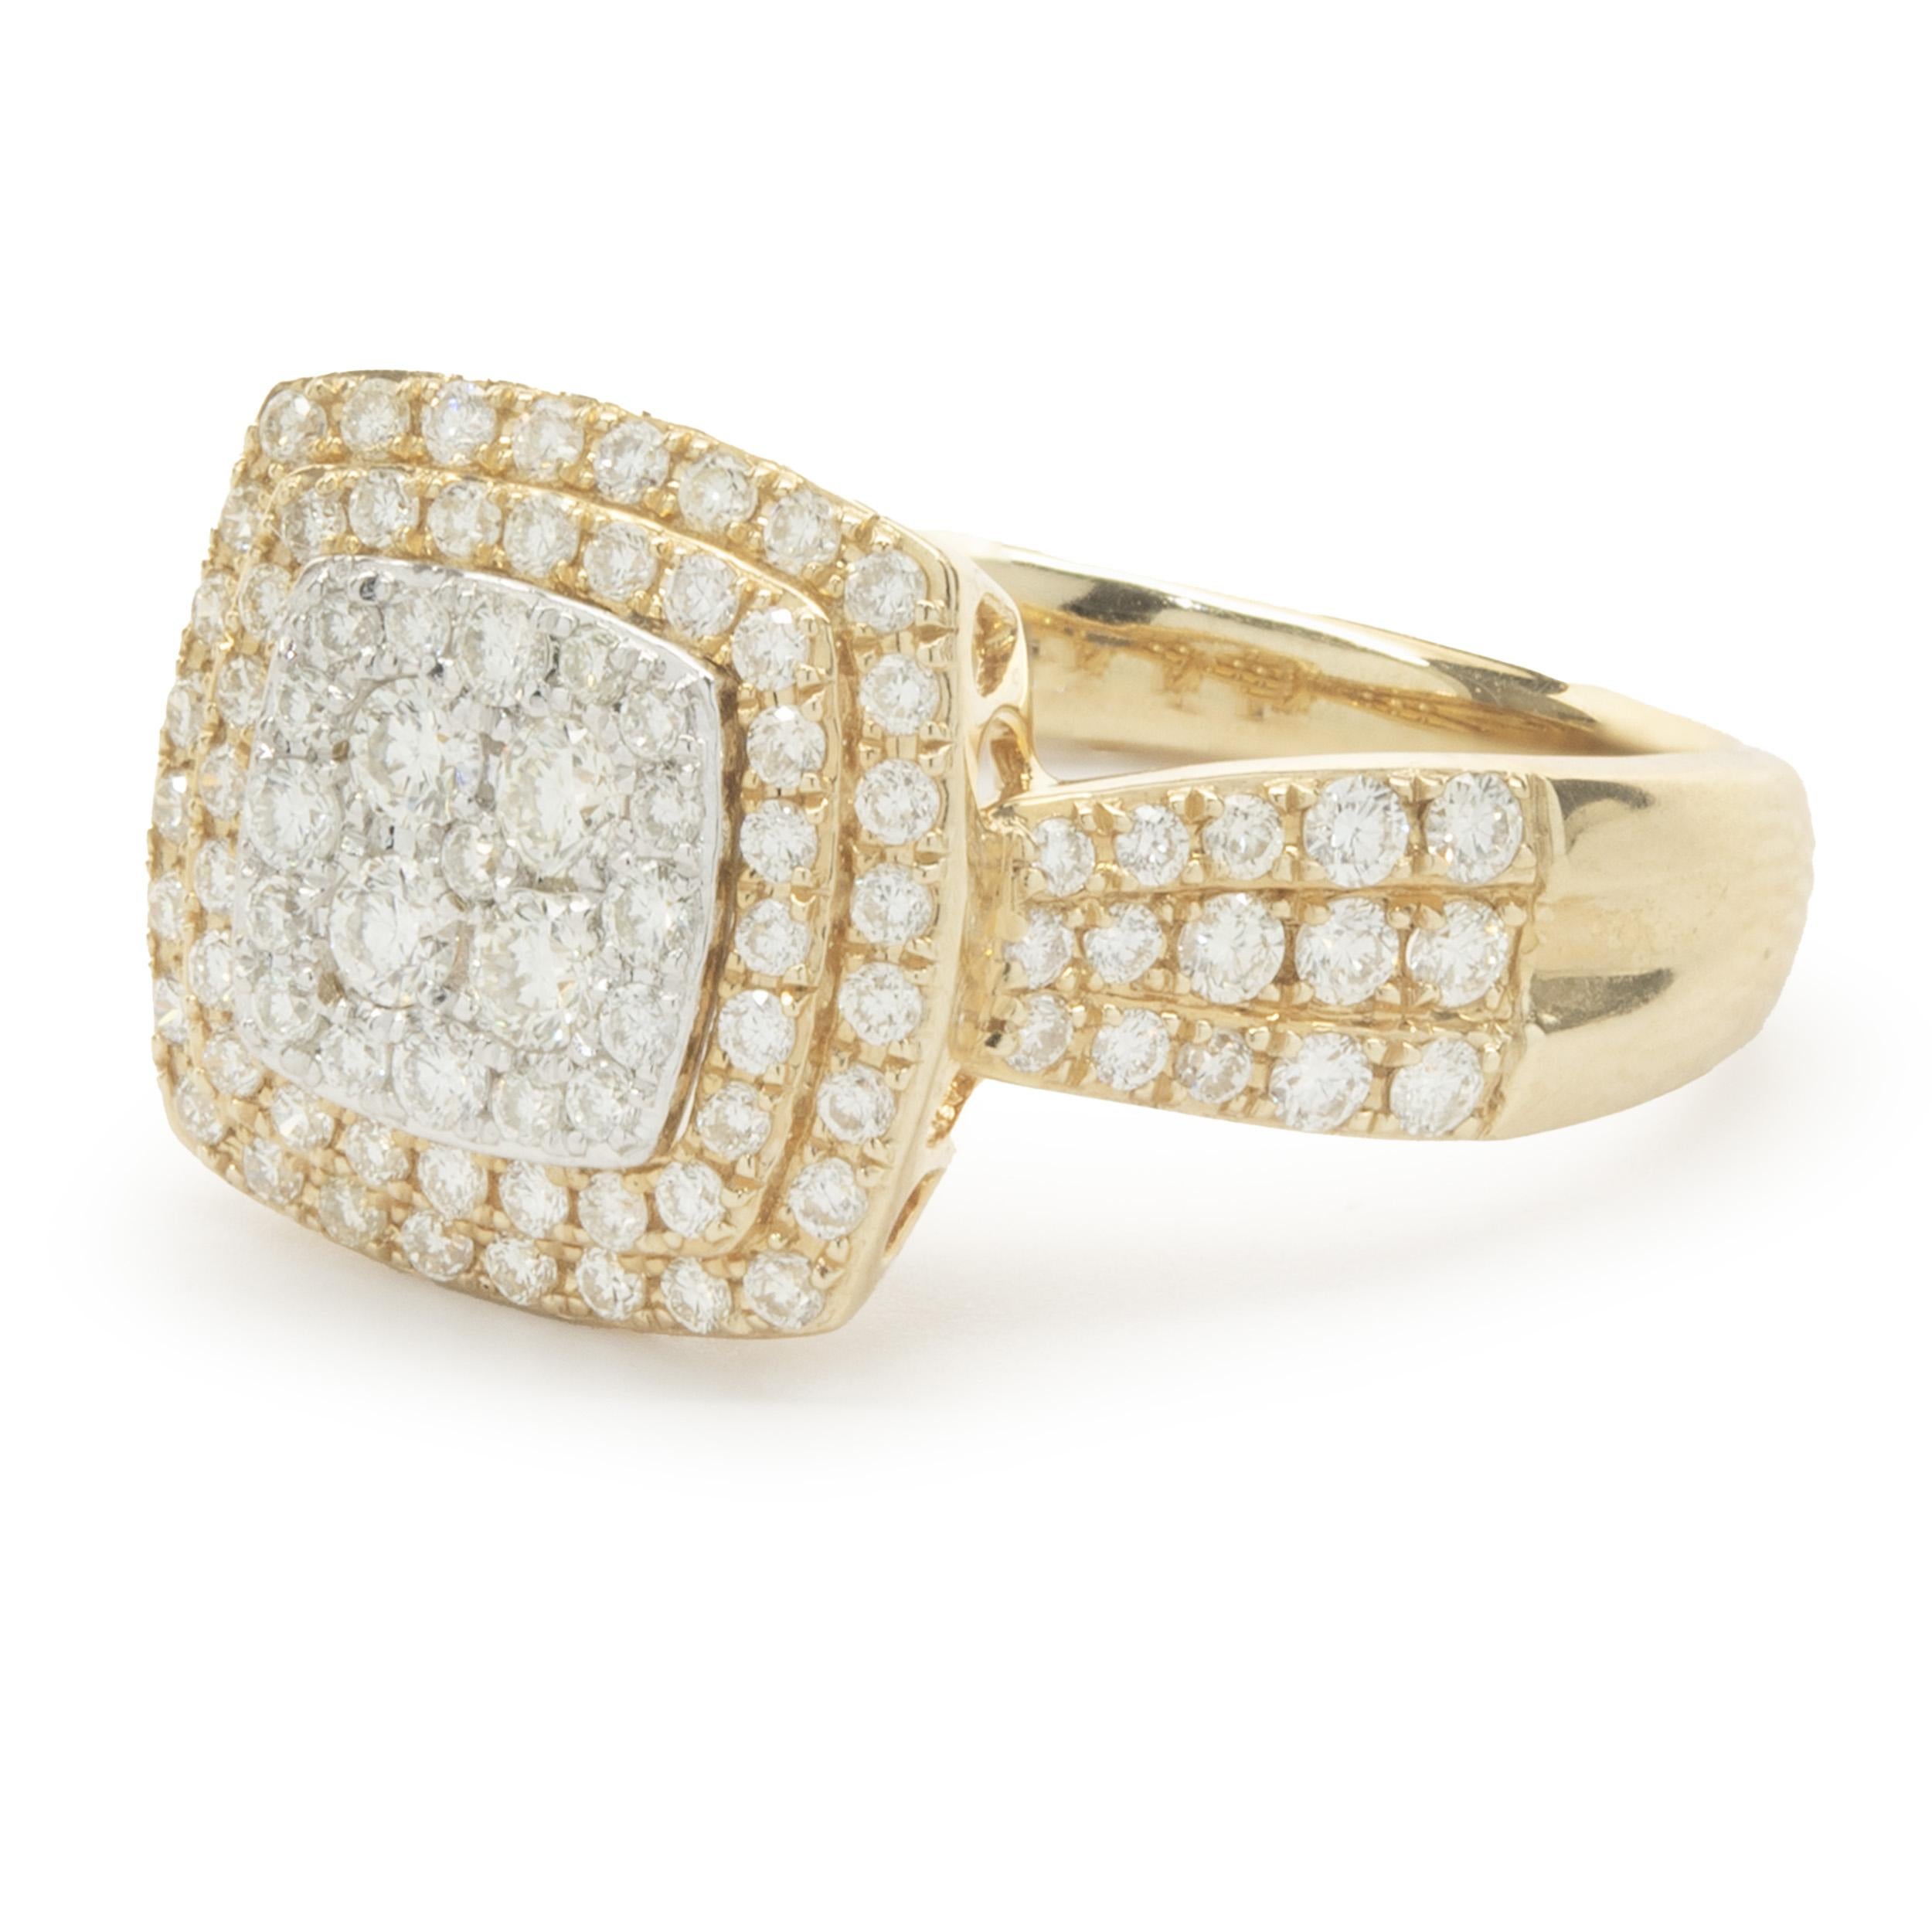 14 Karat Yellow Gold Diamond Cluster Ring In Excellent Condition For Sale In Scottsdale, AZ